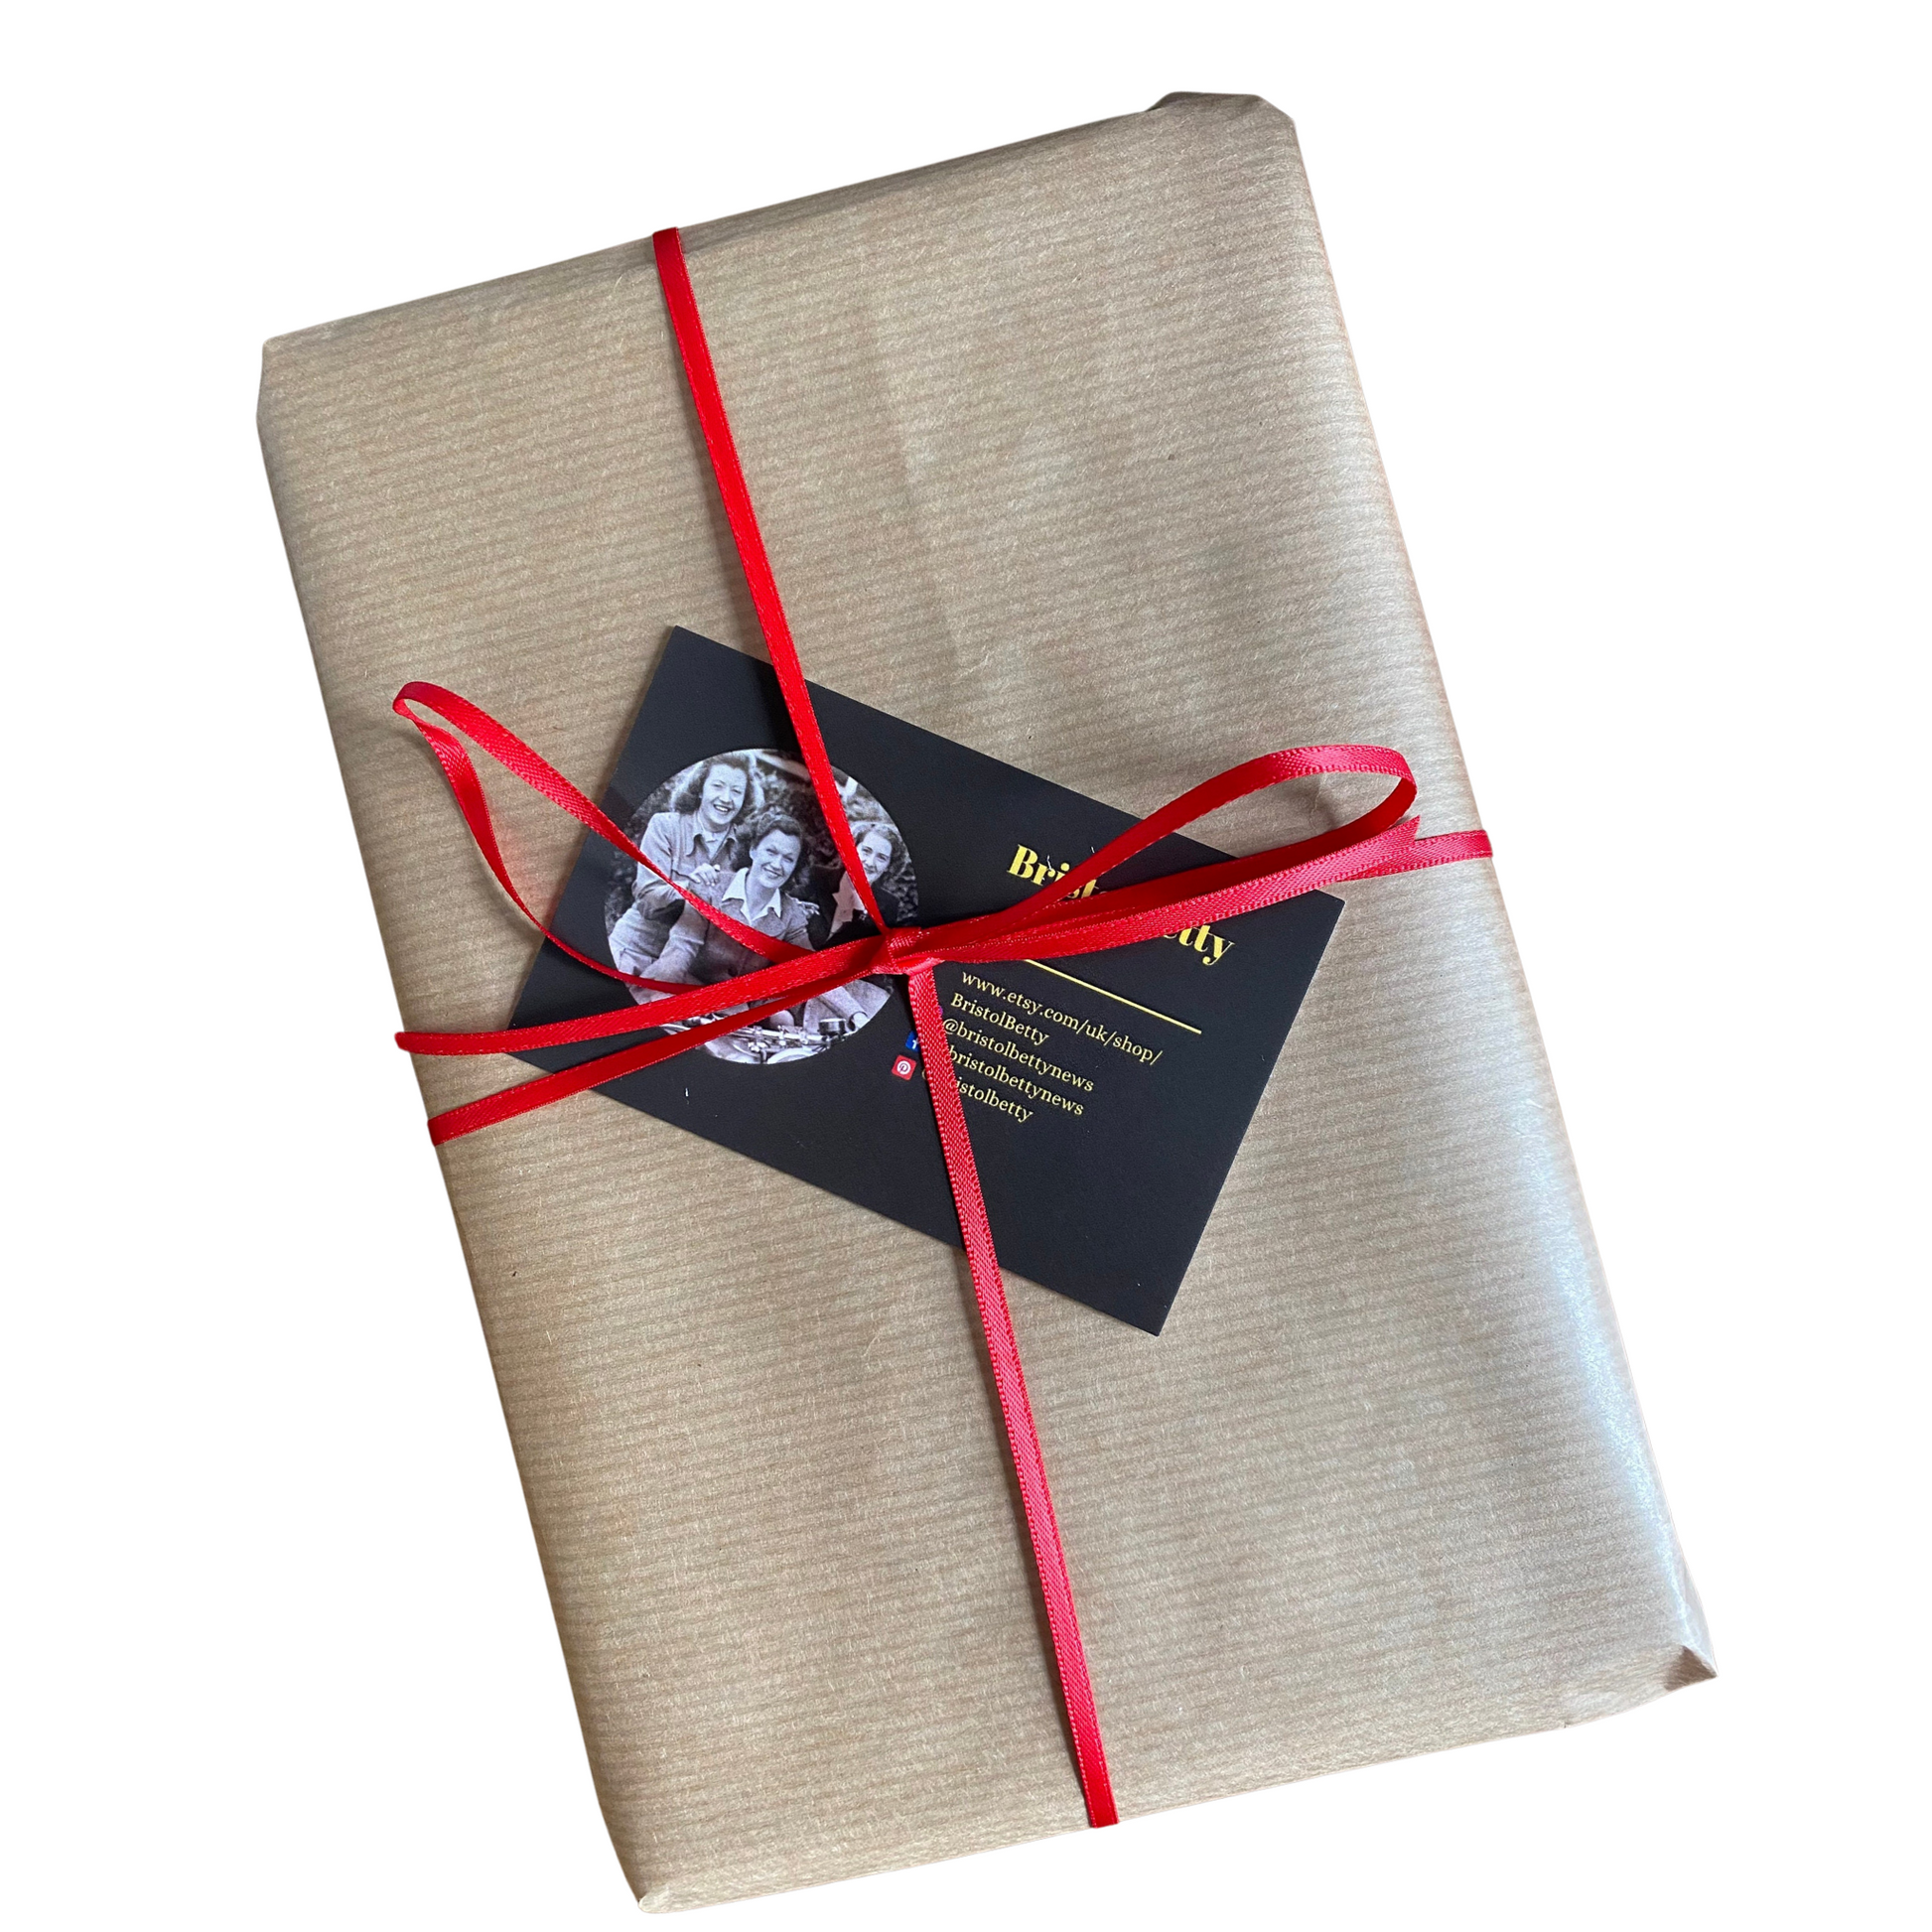 All book orders are gift wrapped in graft paper and ribbon